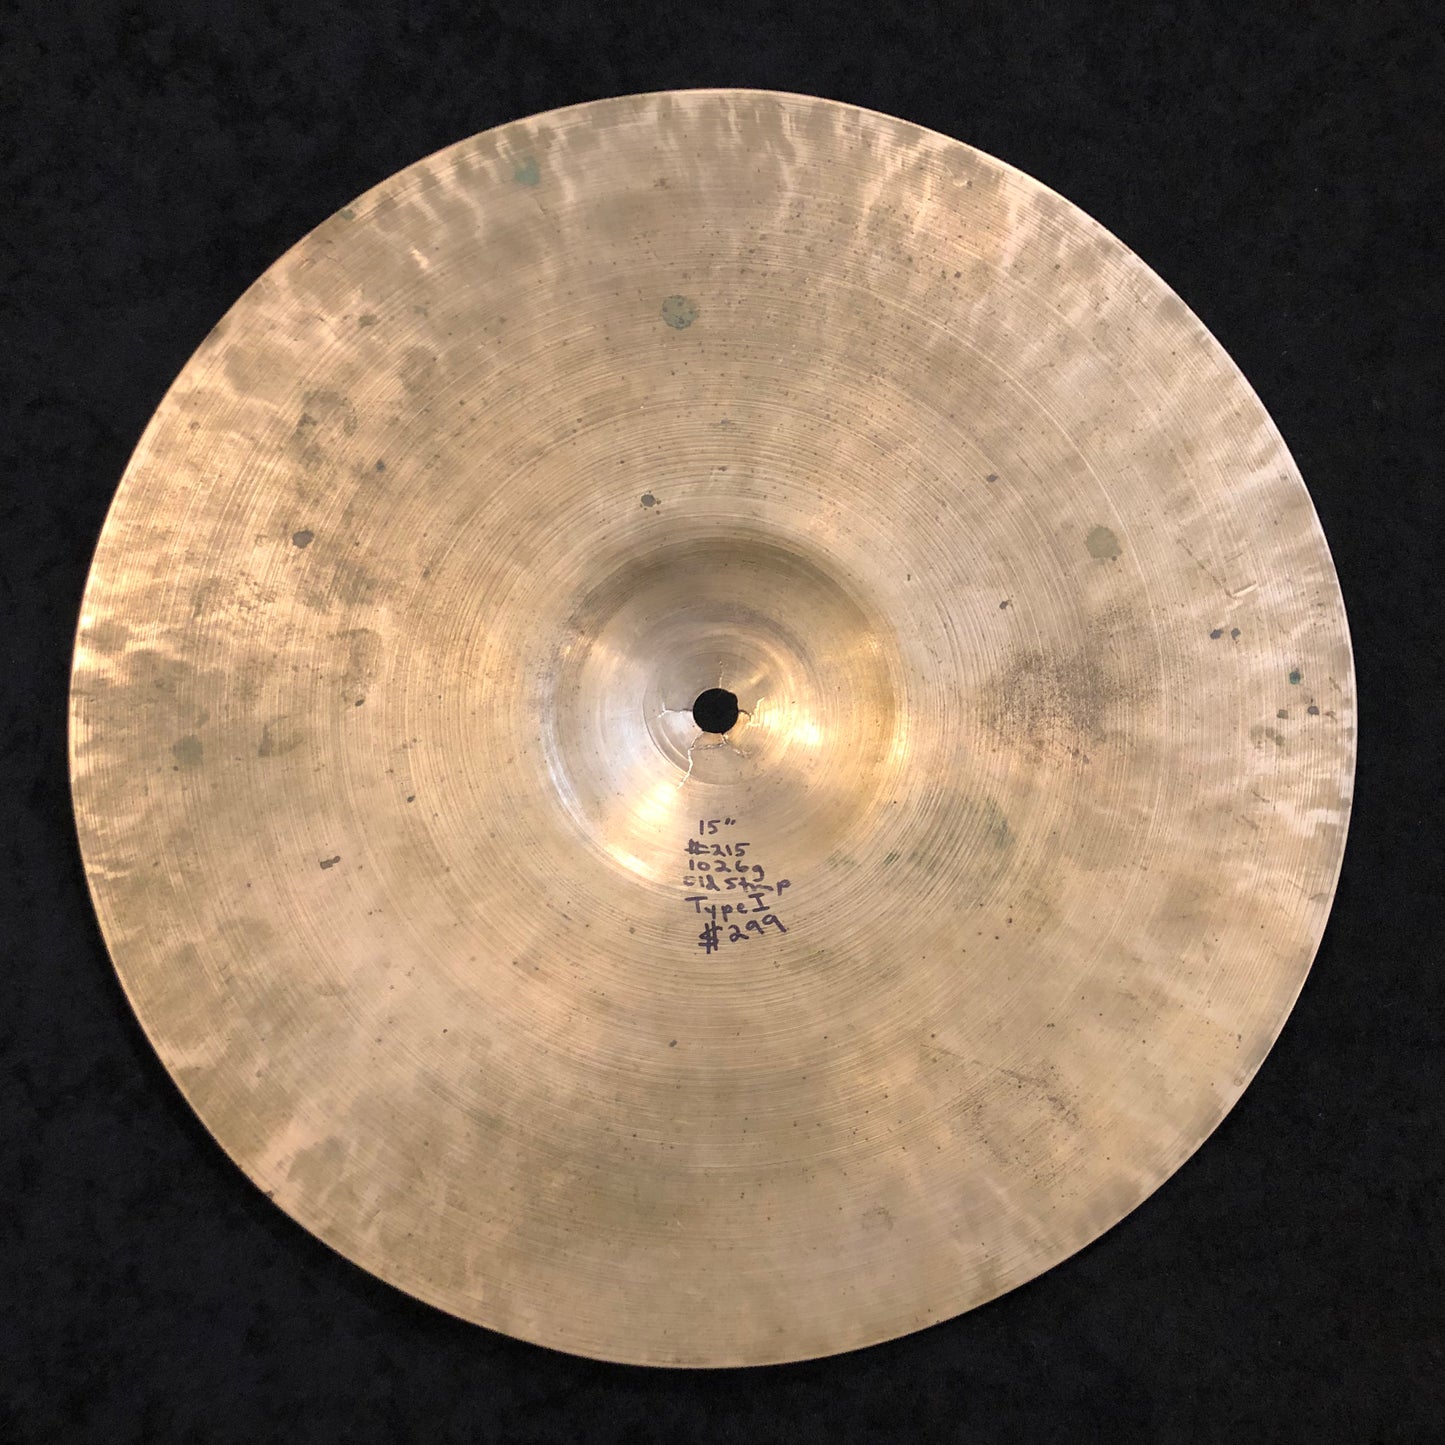 15" K. Zildjian Istanbul 1930s-1945 Old Stamp Type I Hi Hat / Small Ride Cymbal 1026g #215